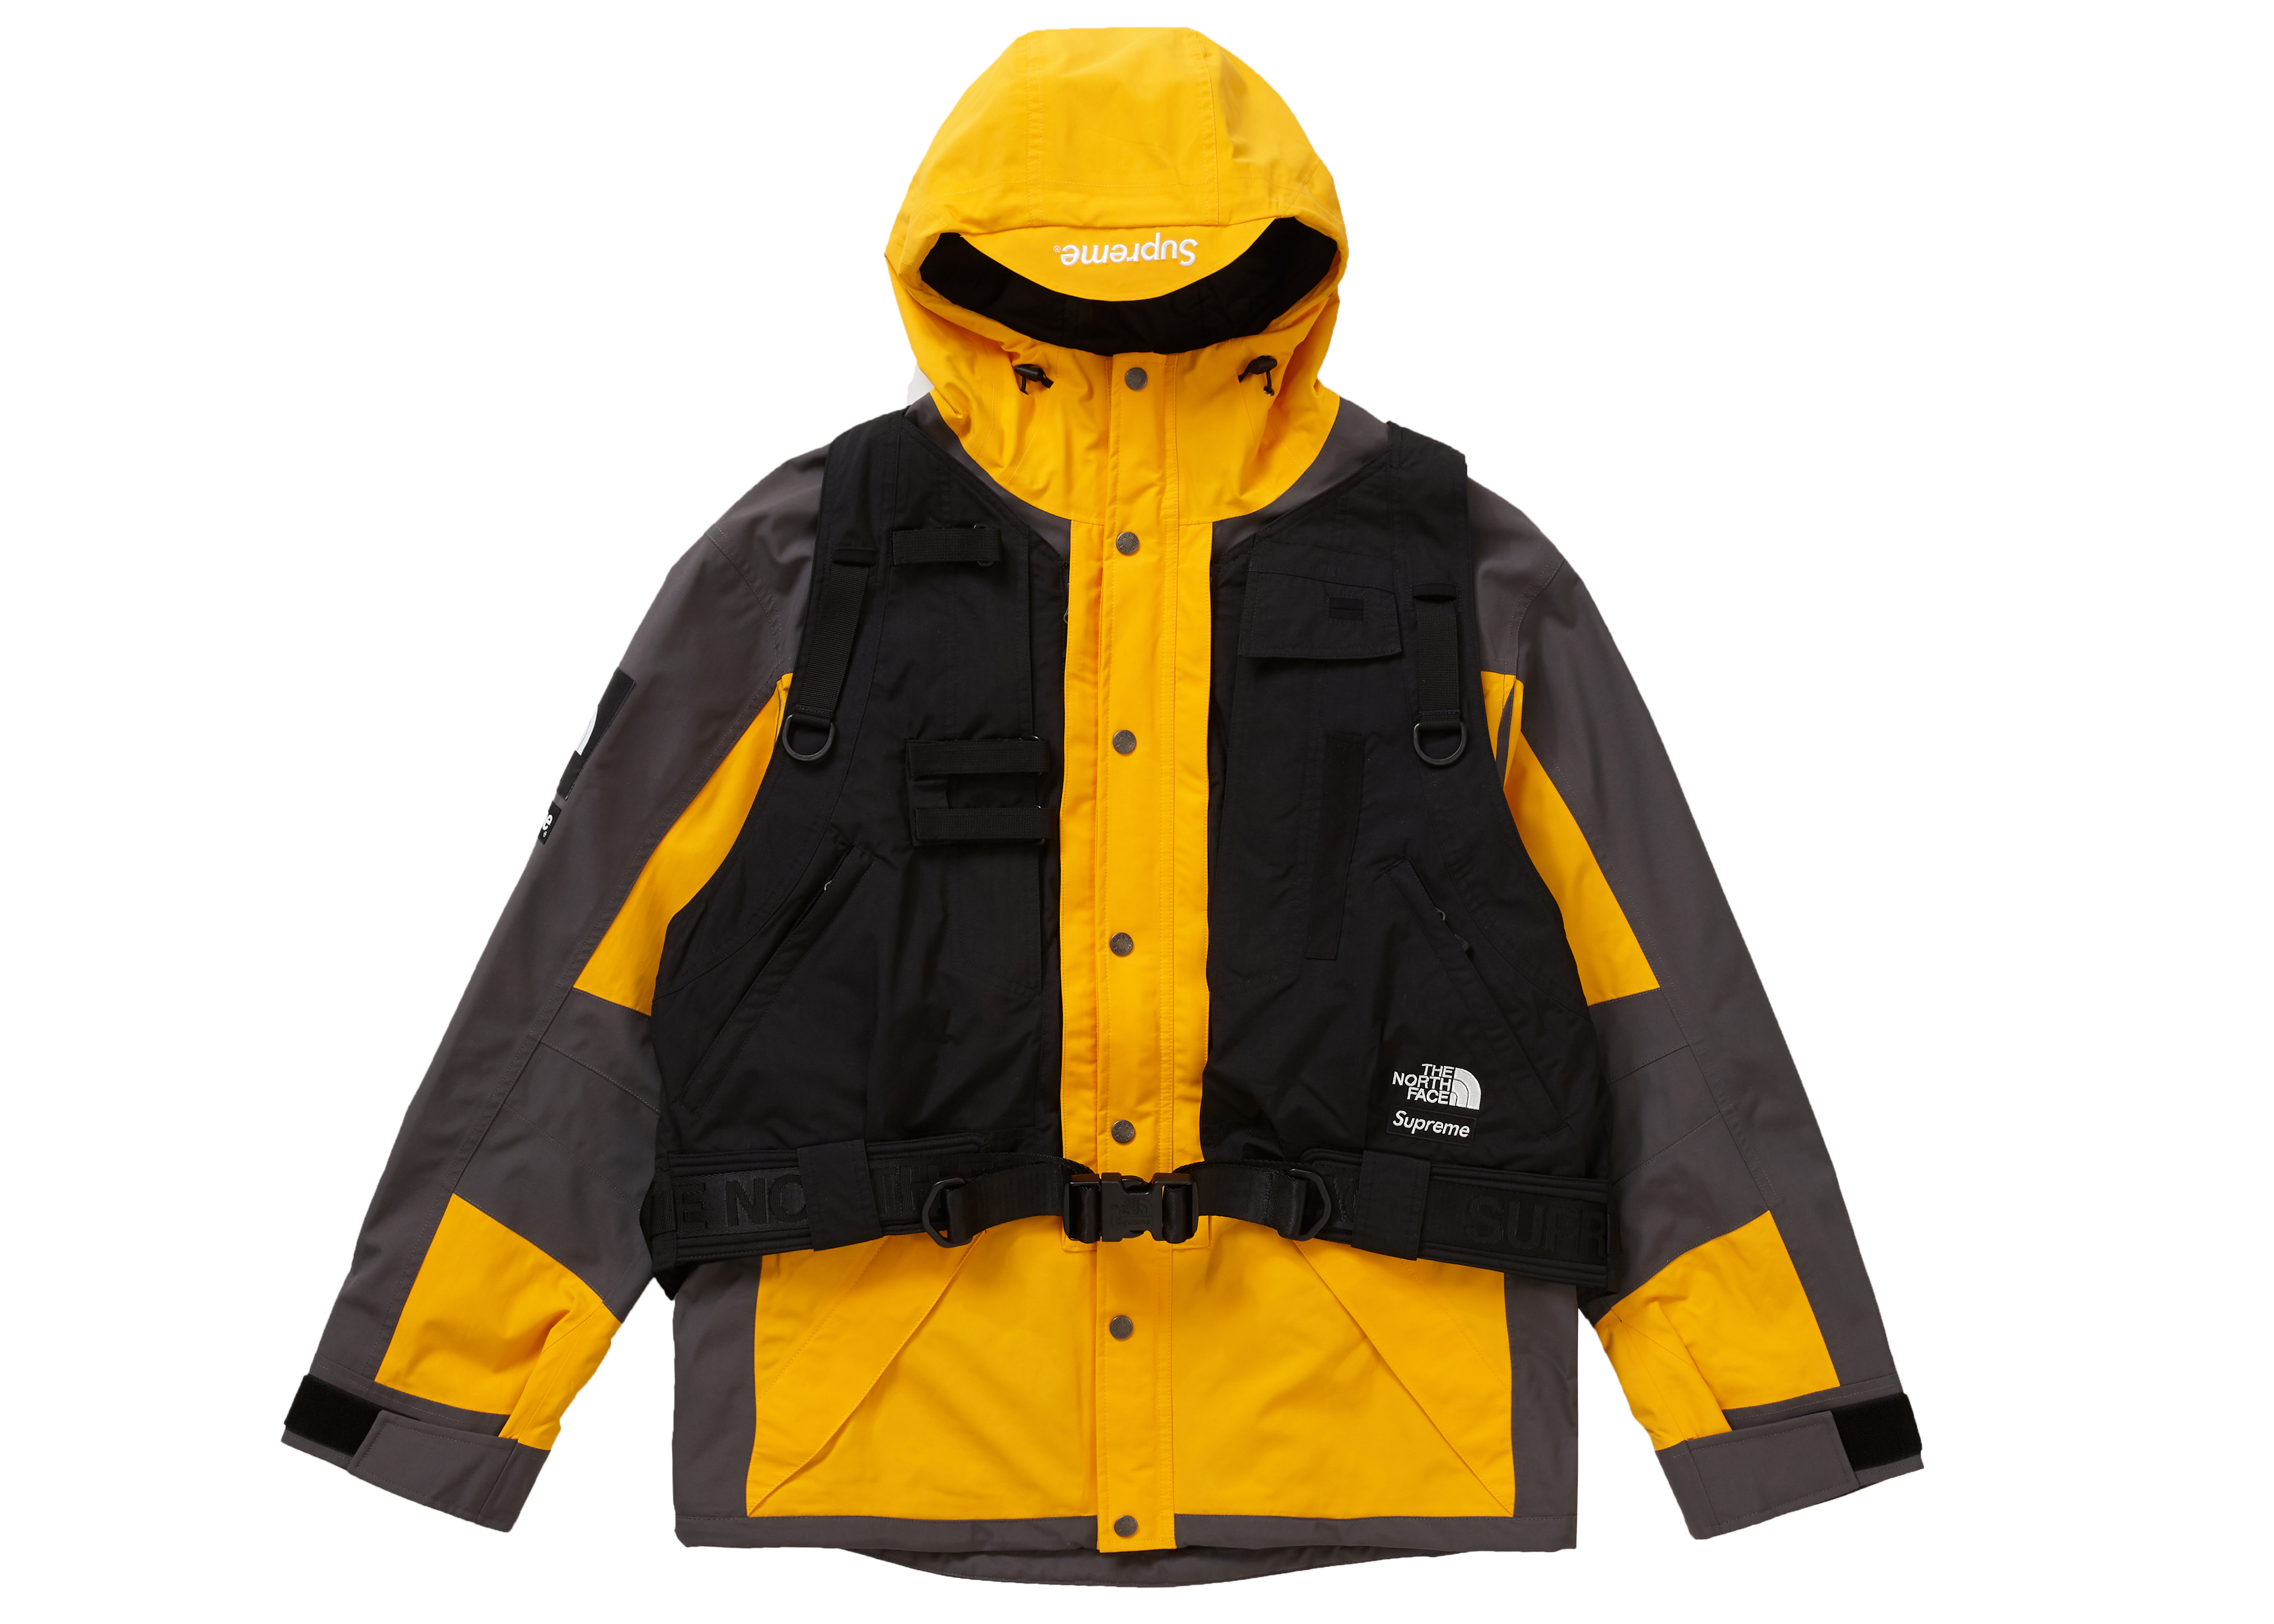 The Best Supreme The North Face Jackets This Fall - StockX